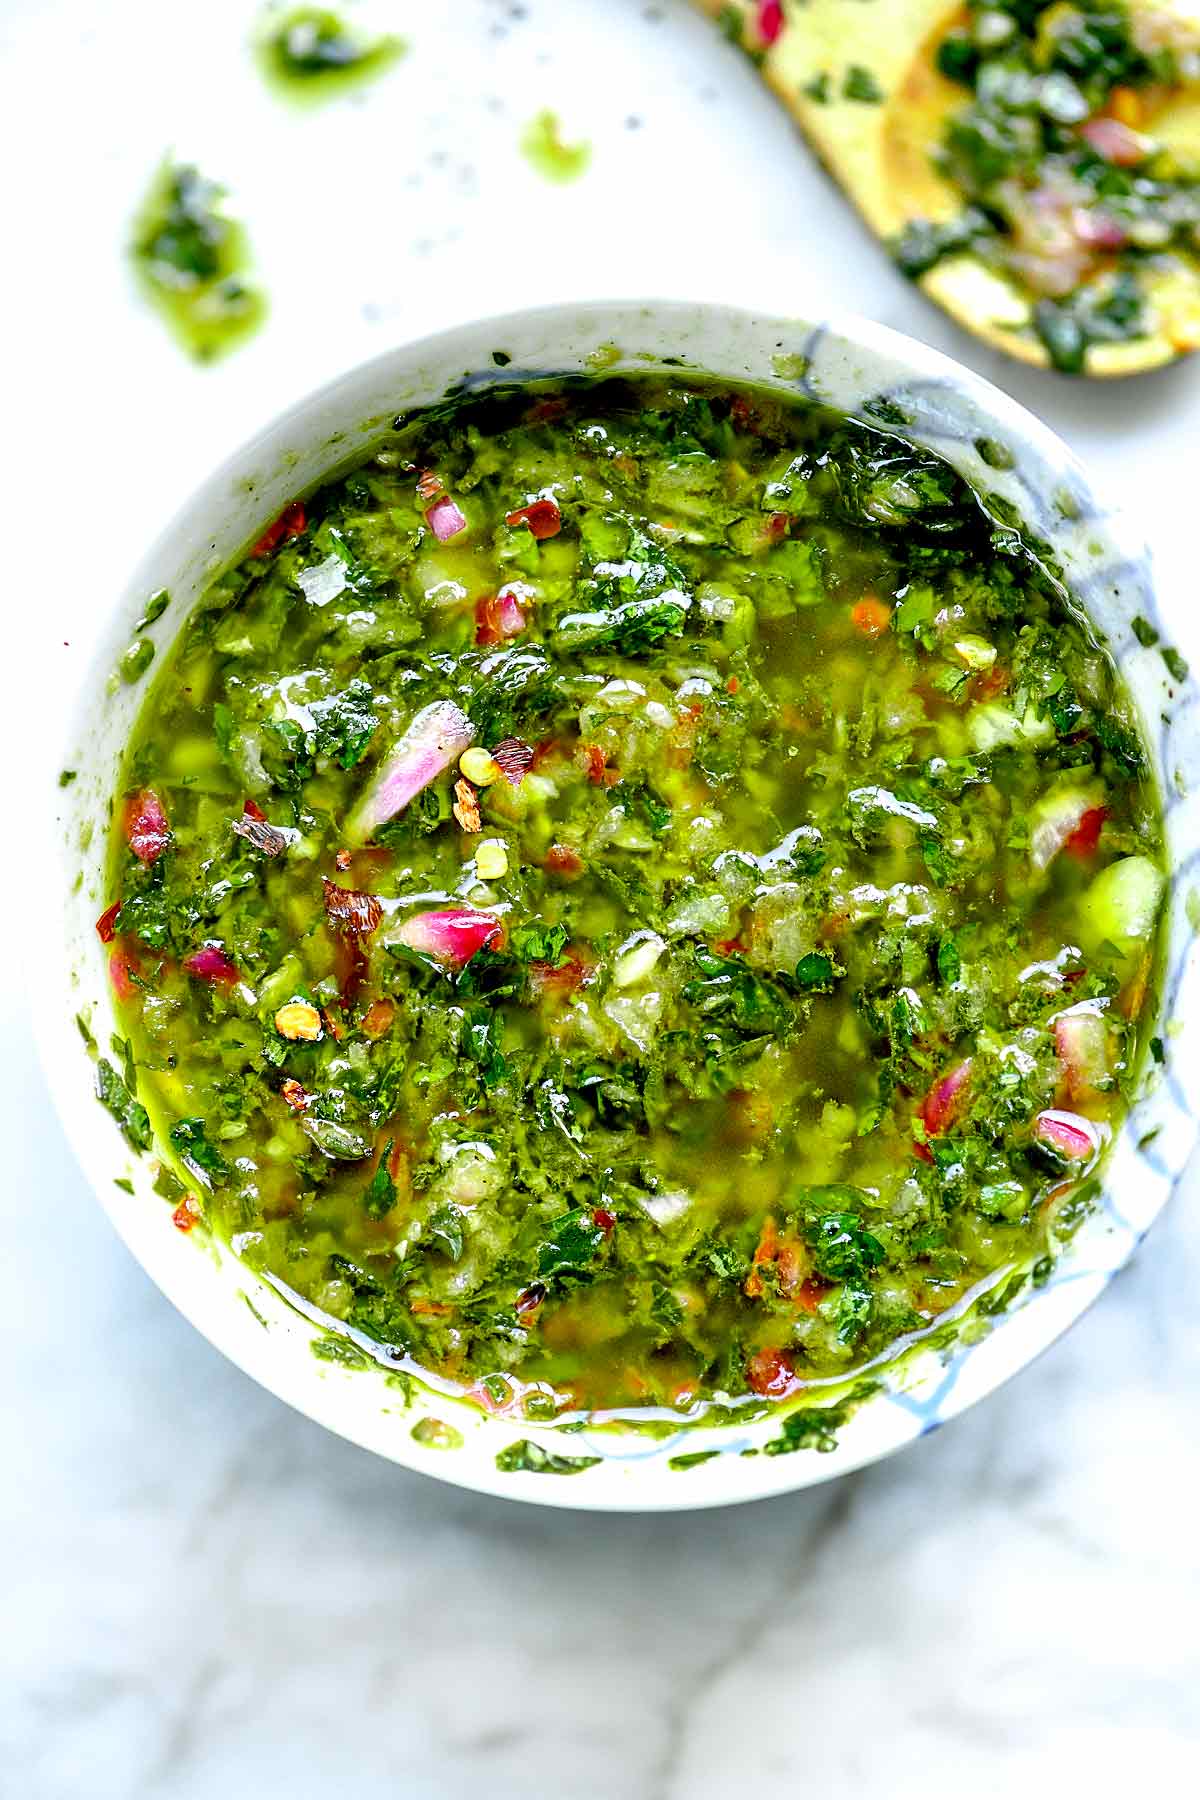 How to Make THE BEST Chimichurri Sauce - Relish